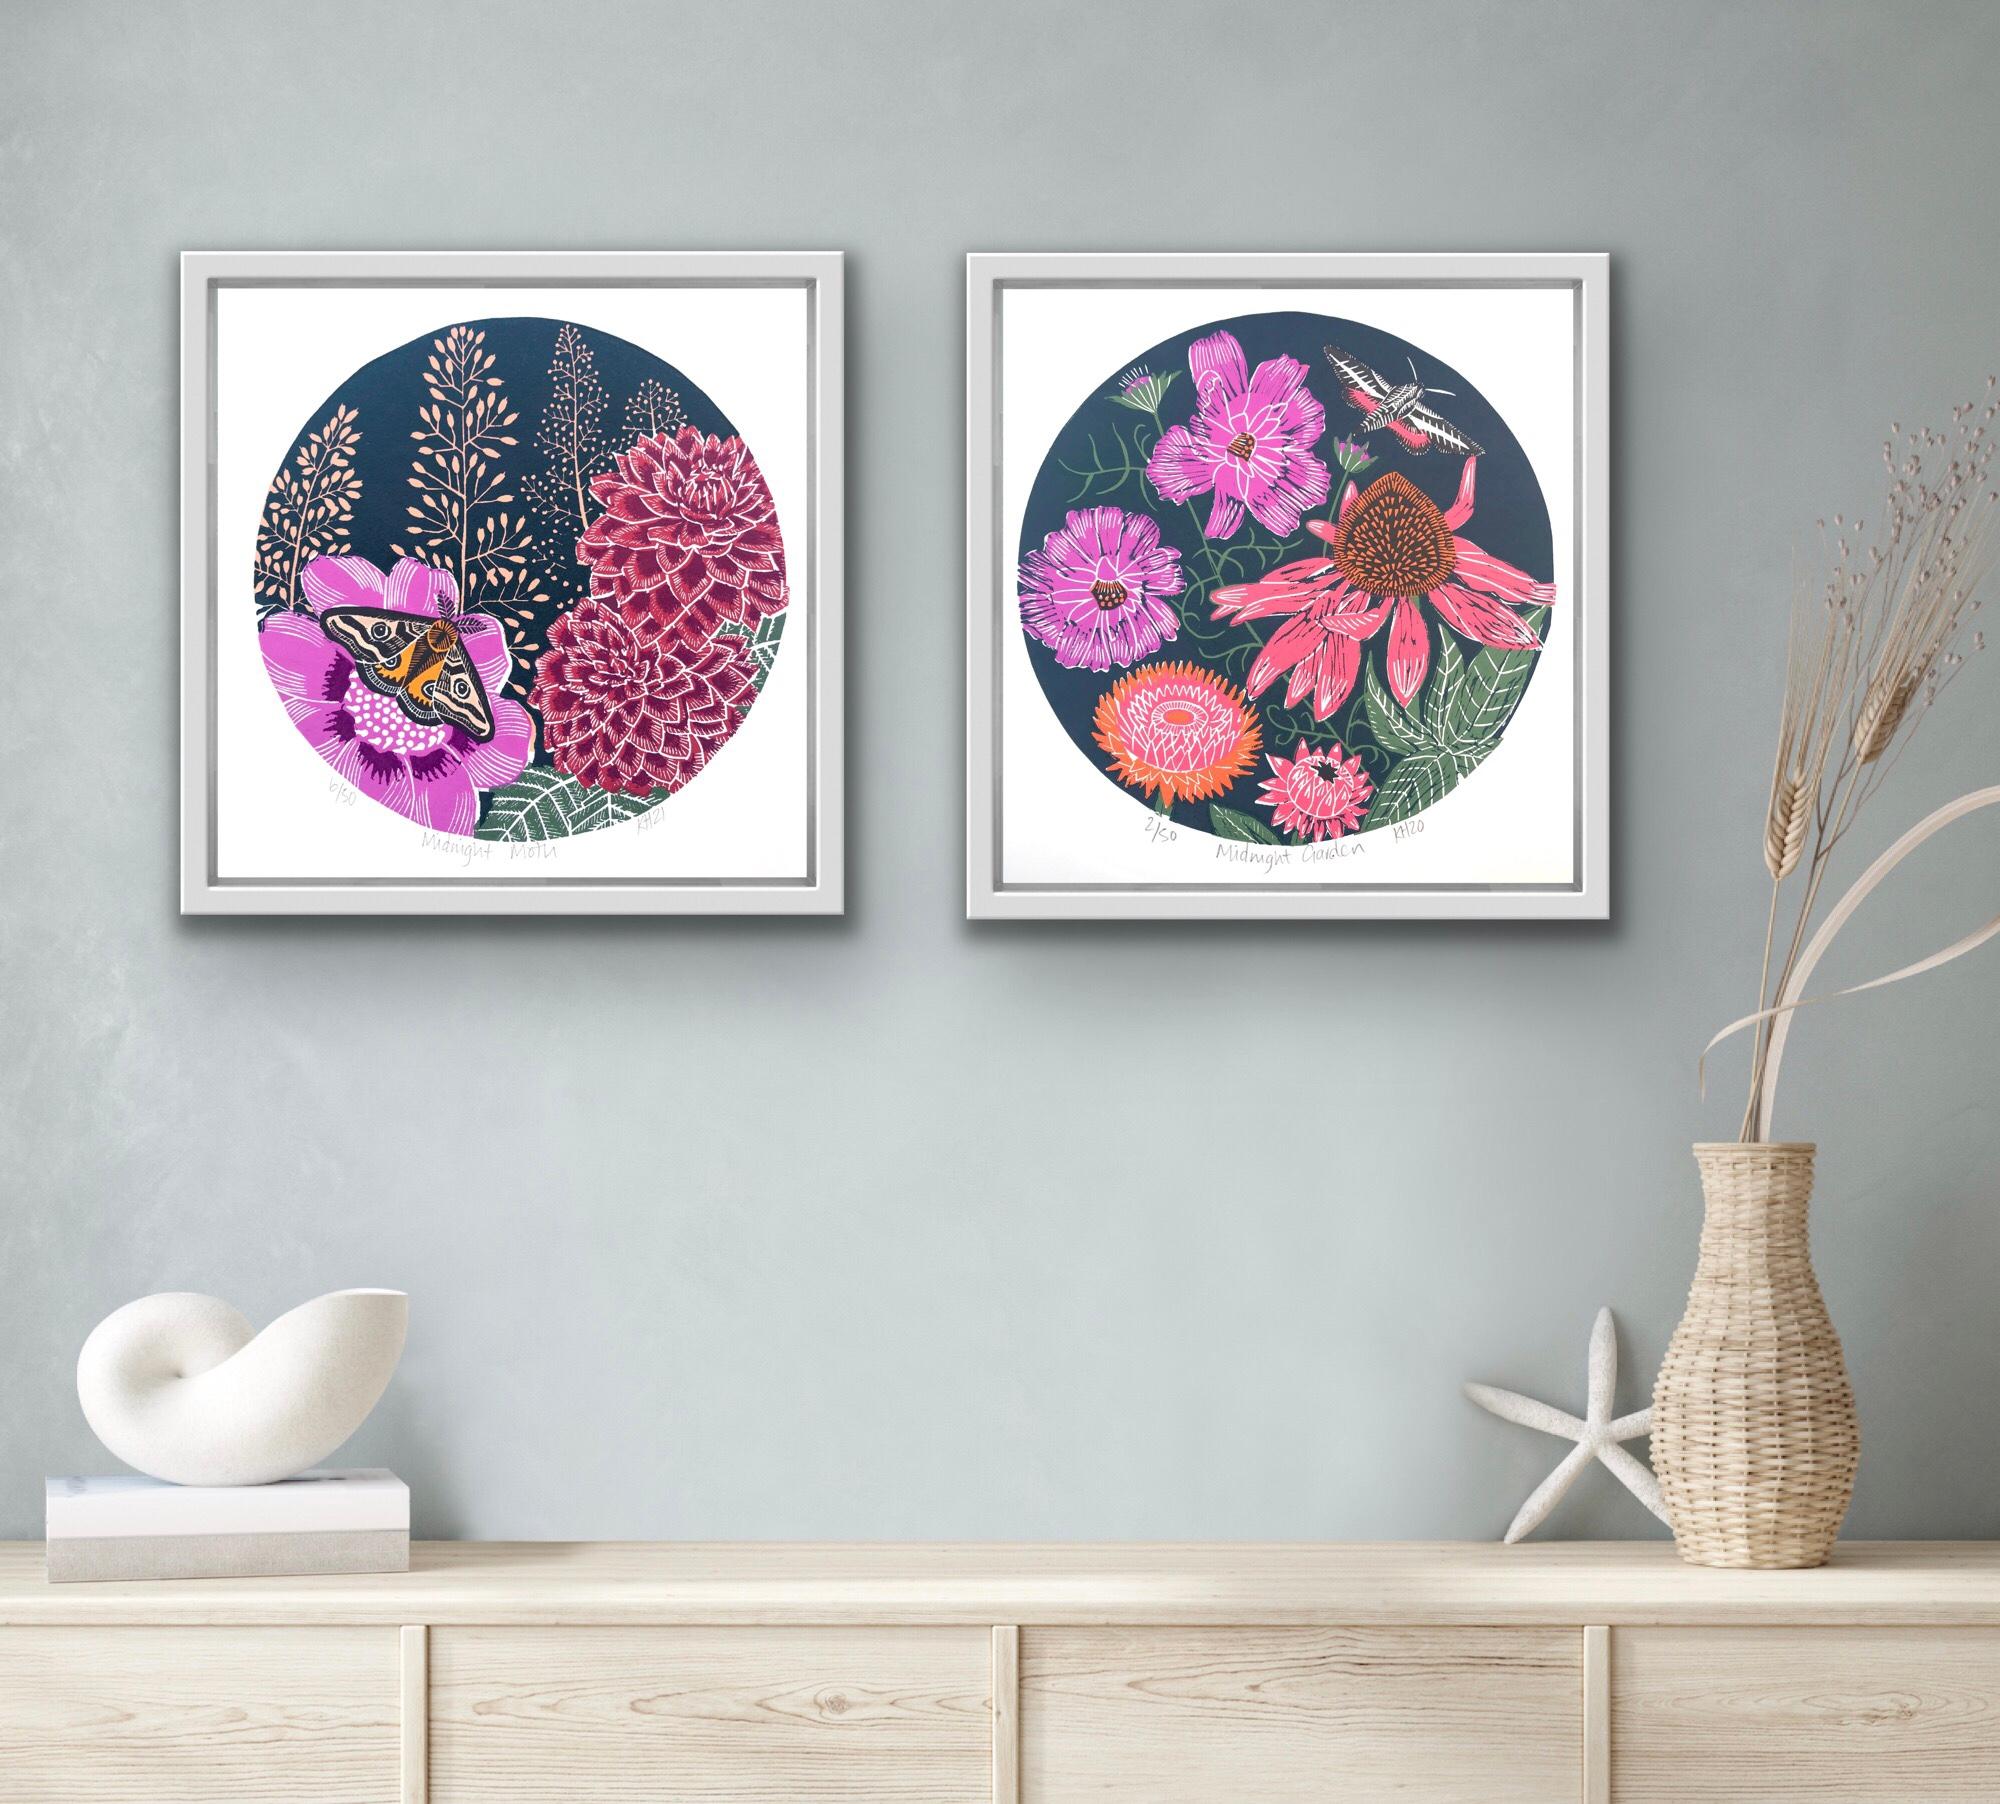 Midnight Moth and Midnight Garden - Print by Kate Heiss